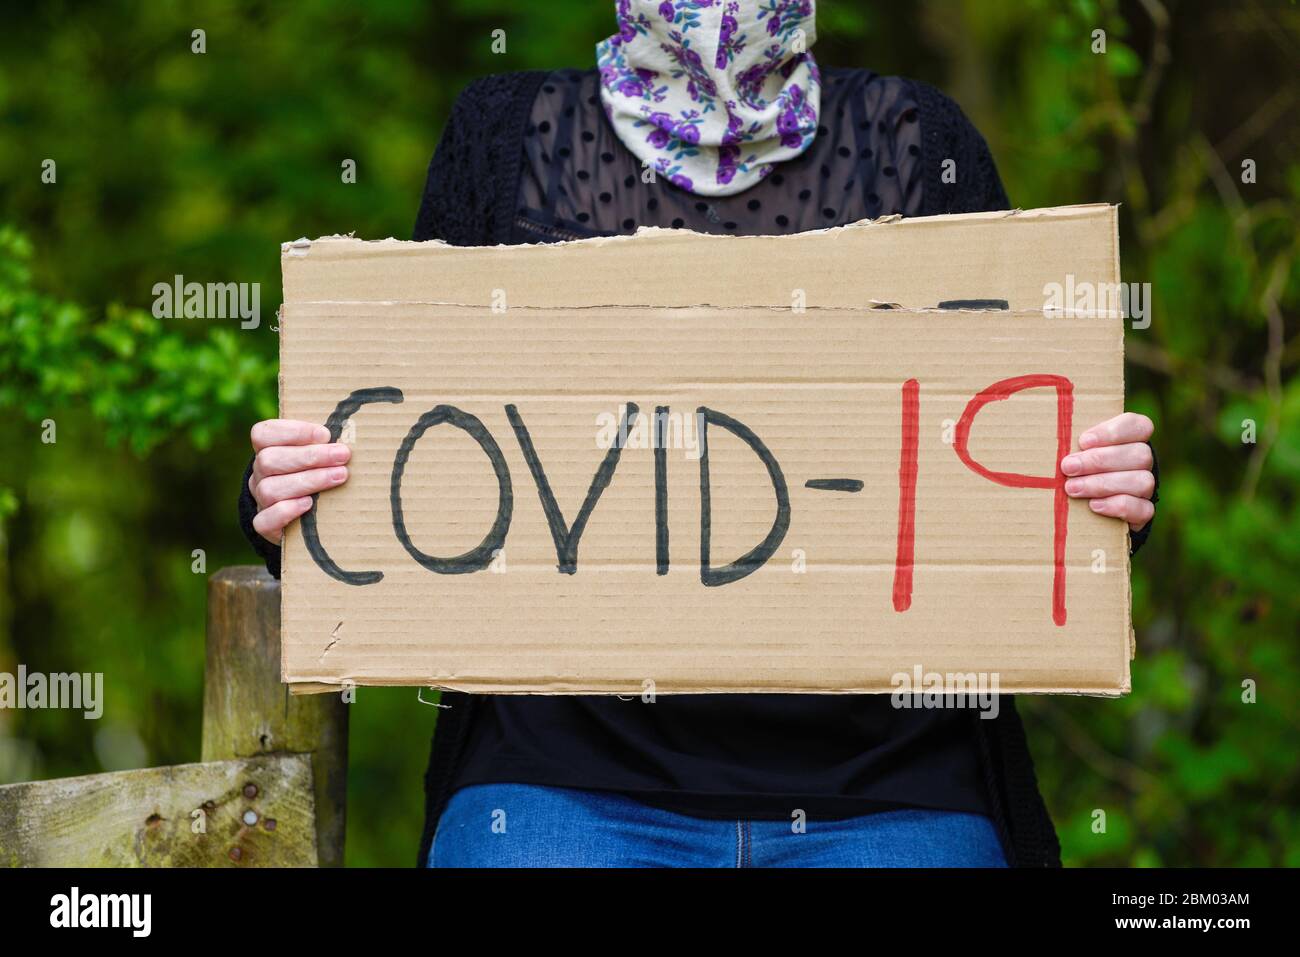 Young Women holding cardboard sign placard Covid-19 Stock Photo